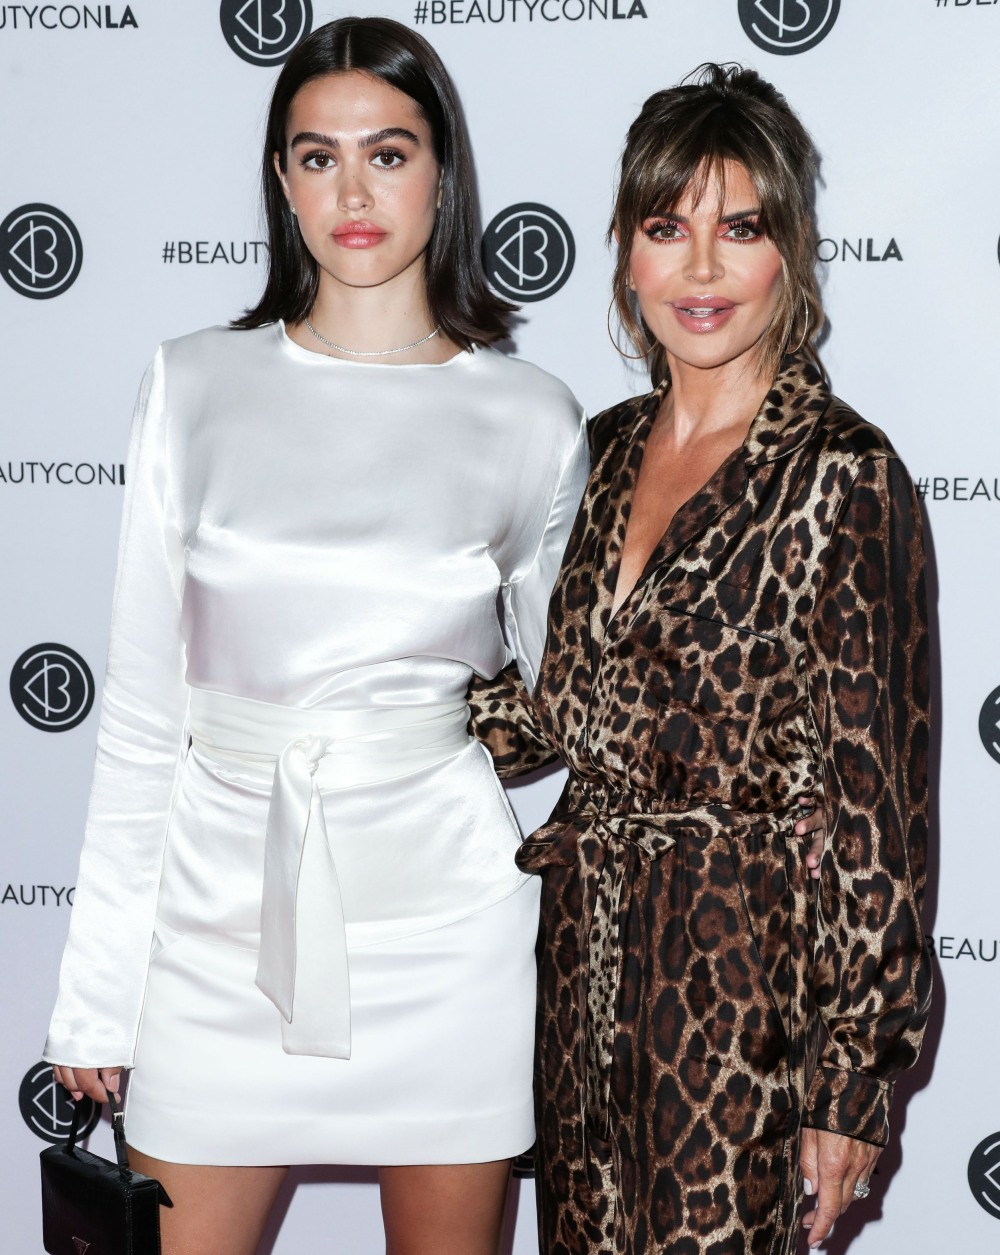 Model Amelia Gray Hamlin and mother/actress Lisa Rinna arrive at the Beautycon Festival Los Angeles 2019 - Day 1 held at the Los Angeles Convention Center on August 10, 2019 in Los Angeles, California, United States.